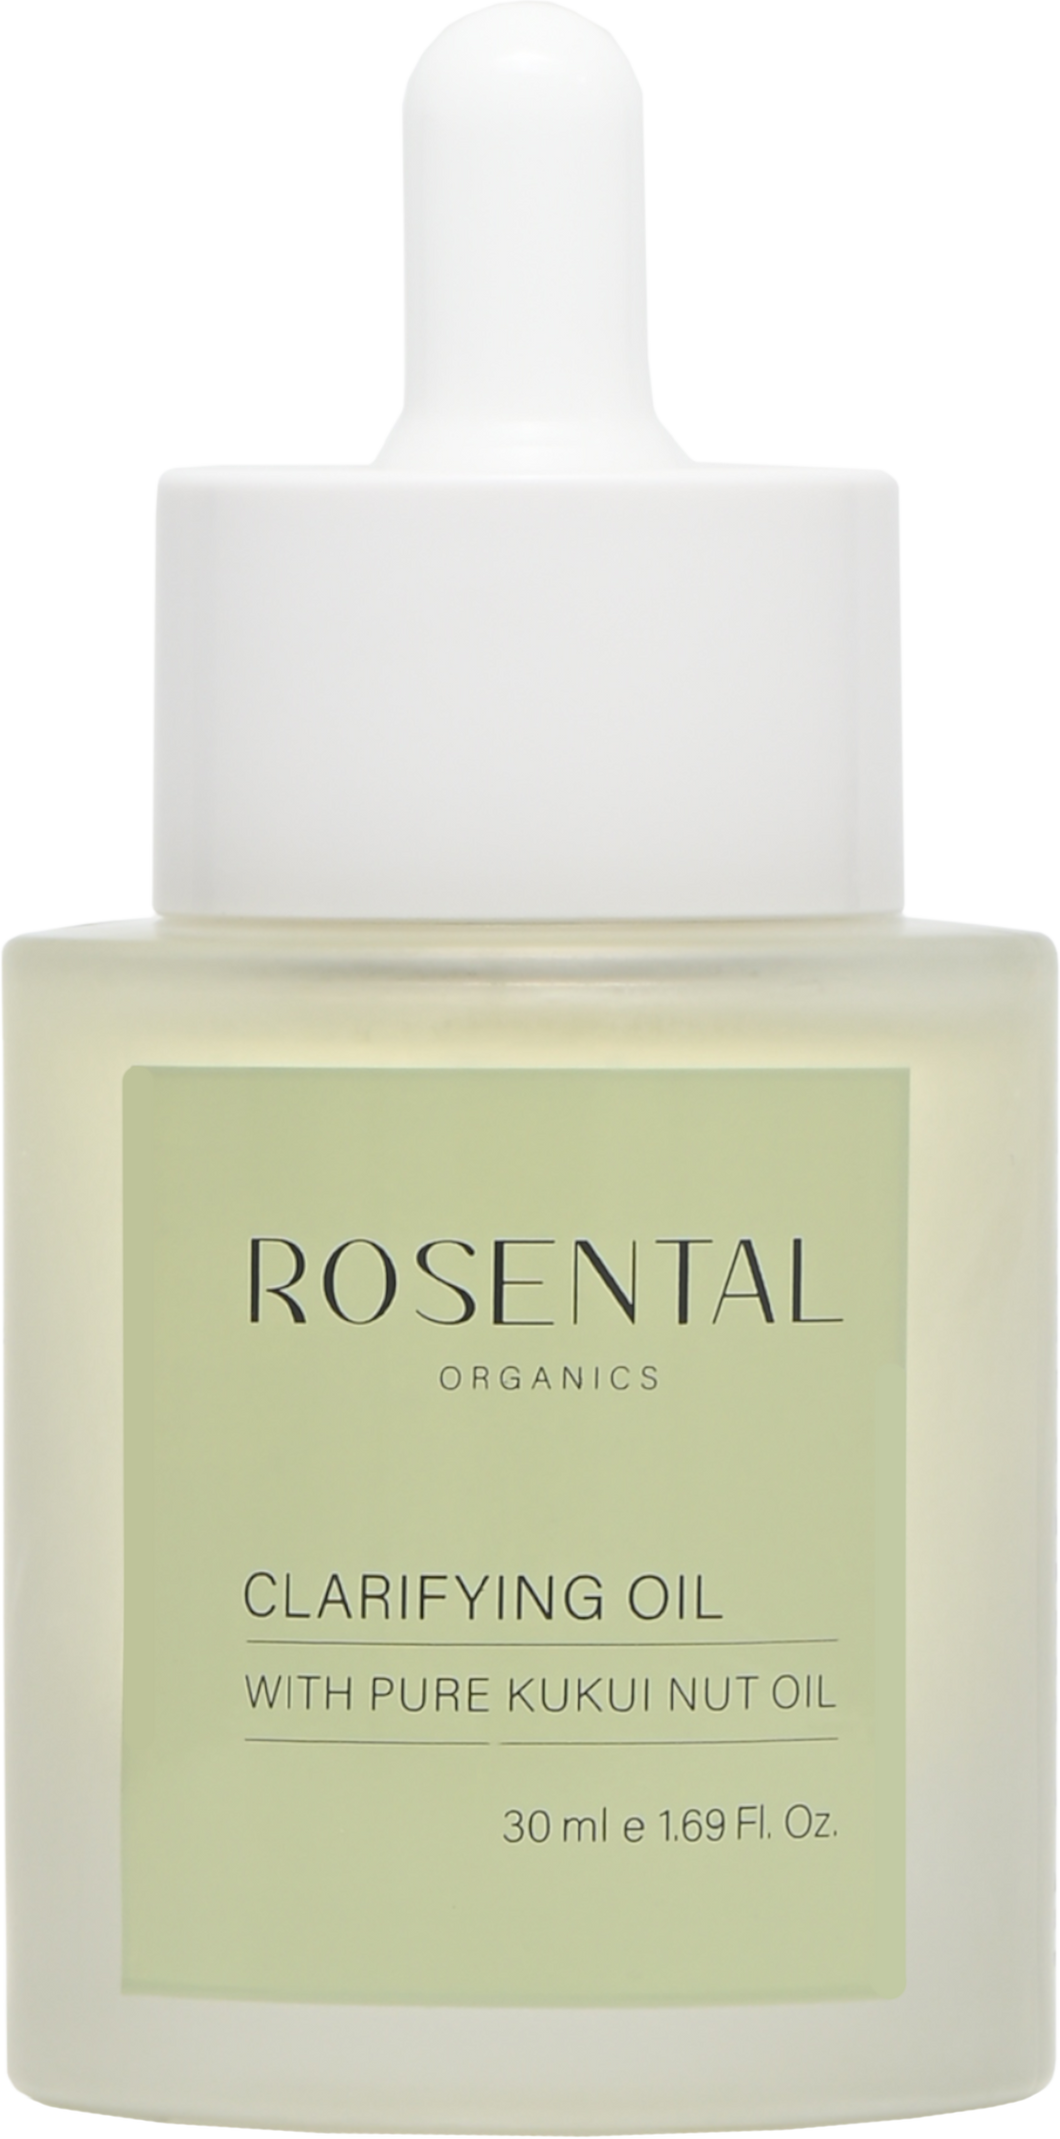 ROSENTAL Clarifying Oil | with Pure Kukui Nut Oil